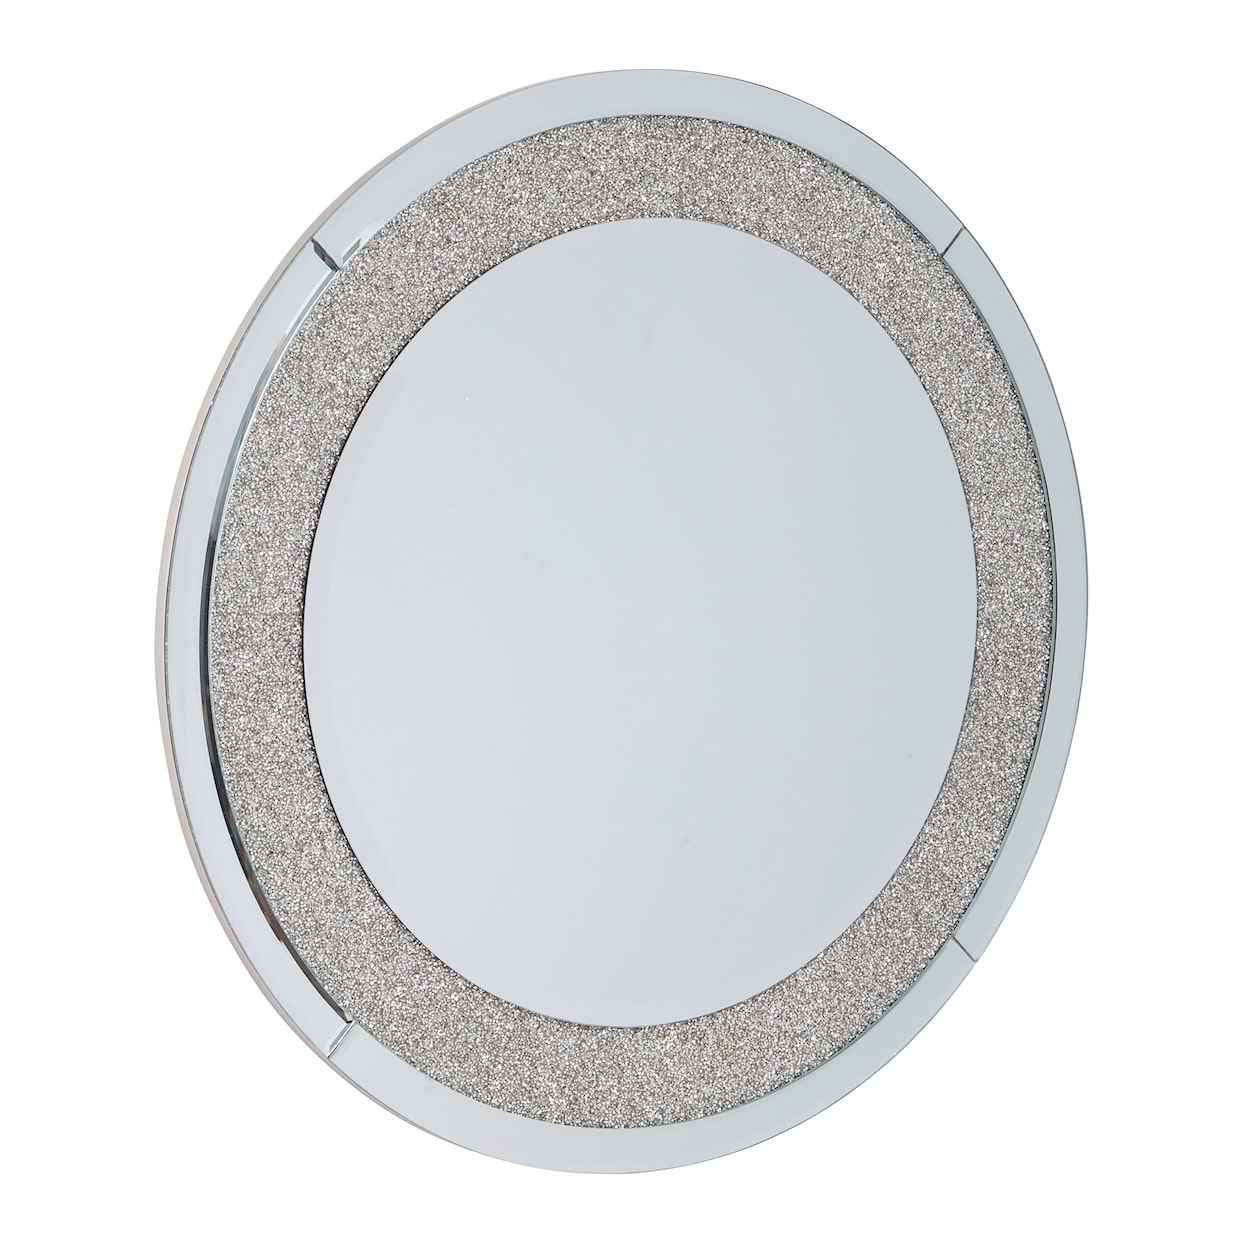 Signature Design by Ashley Accent Mirrors Kingsleigh Round Accent Mirror